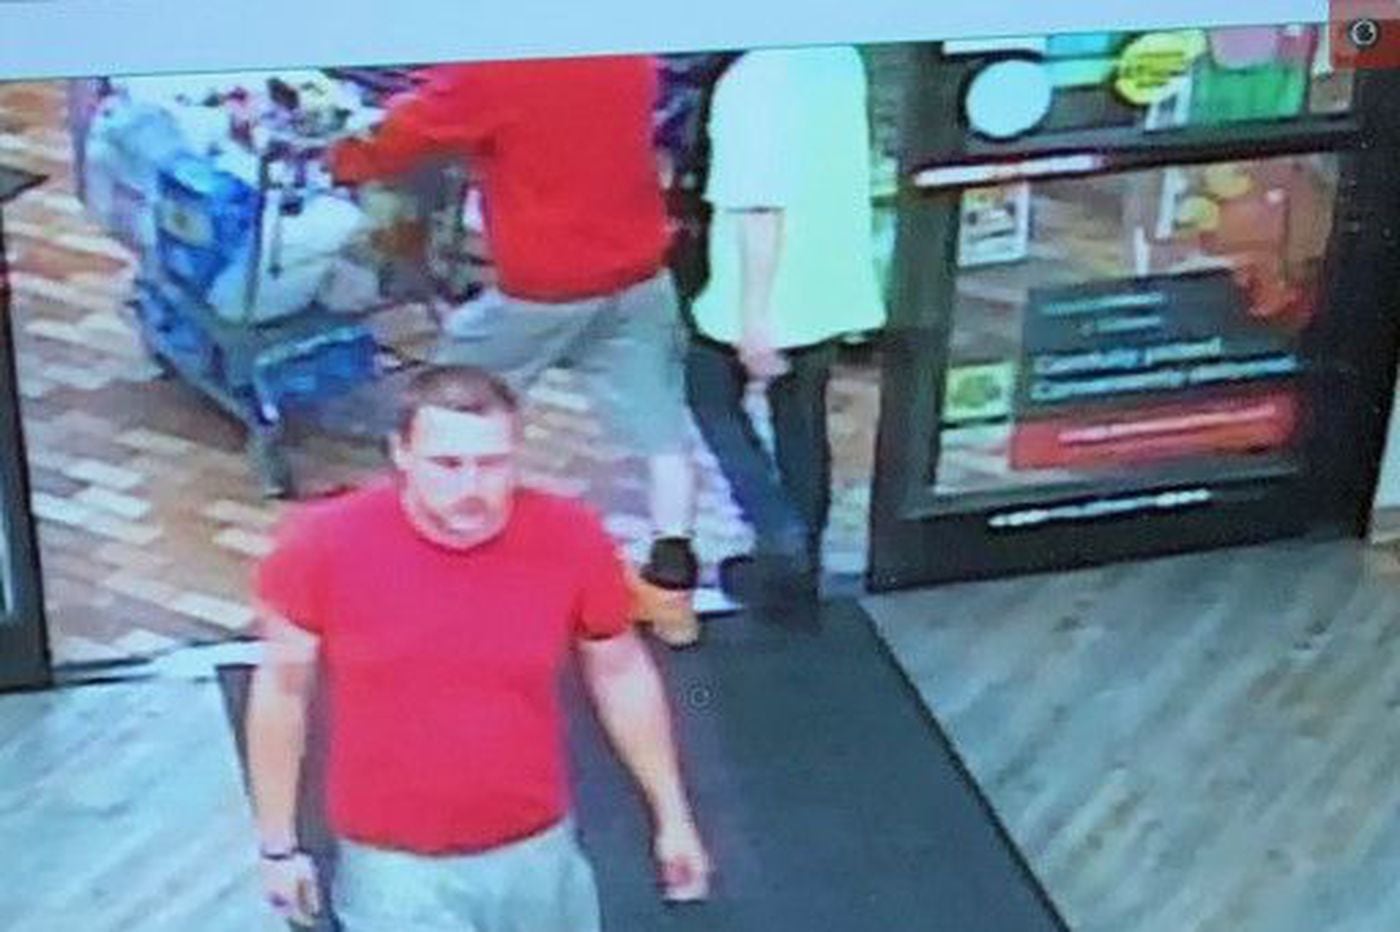 Asked to wear mask, angry man throws hot-sauce bottle at Acme employee in Bucks, police say